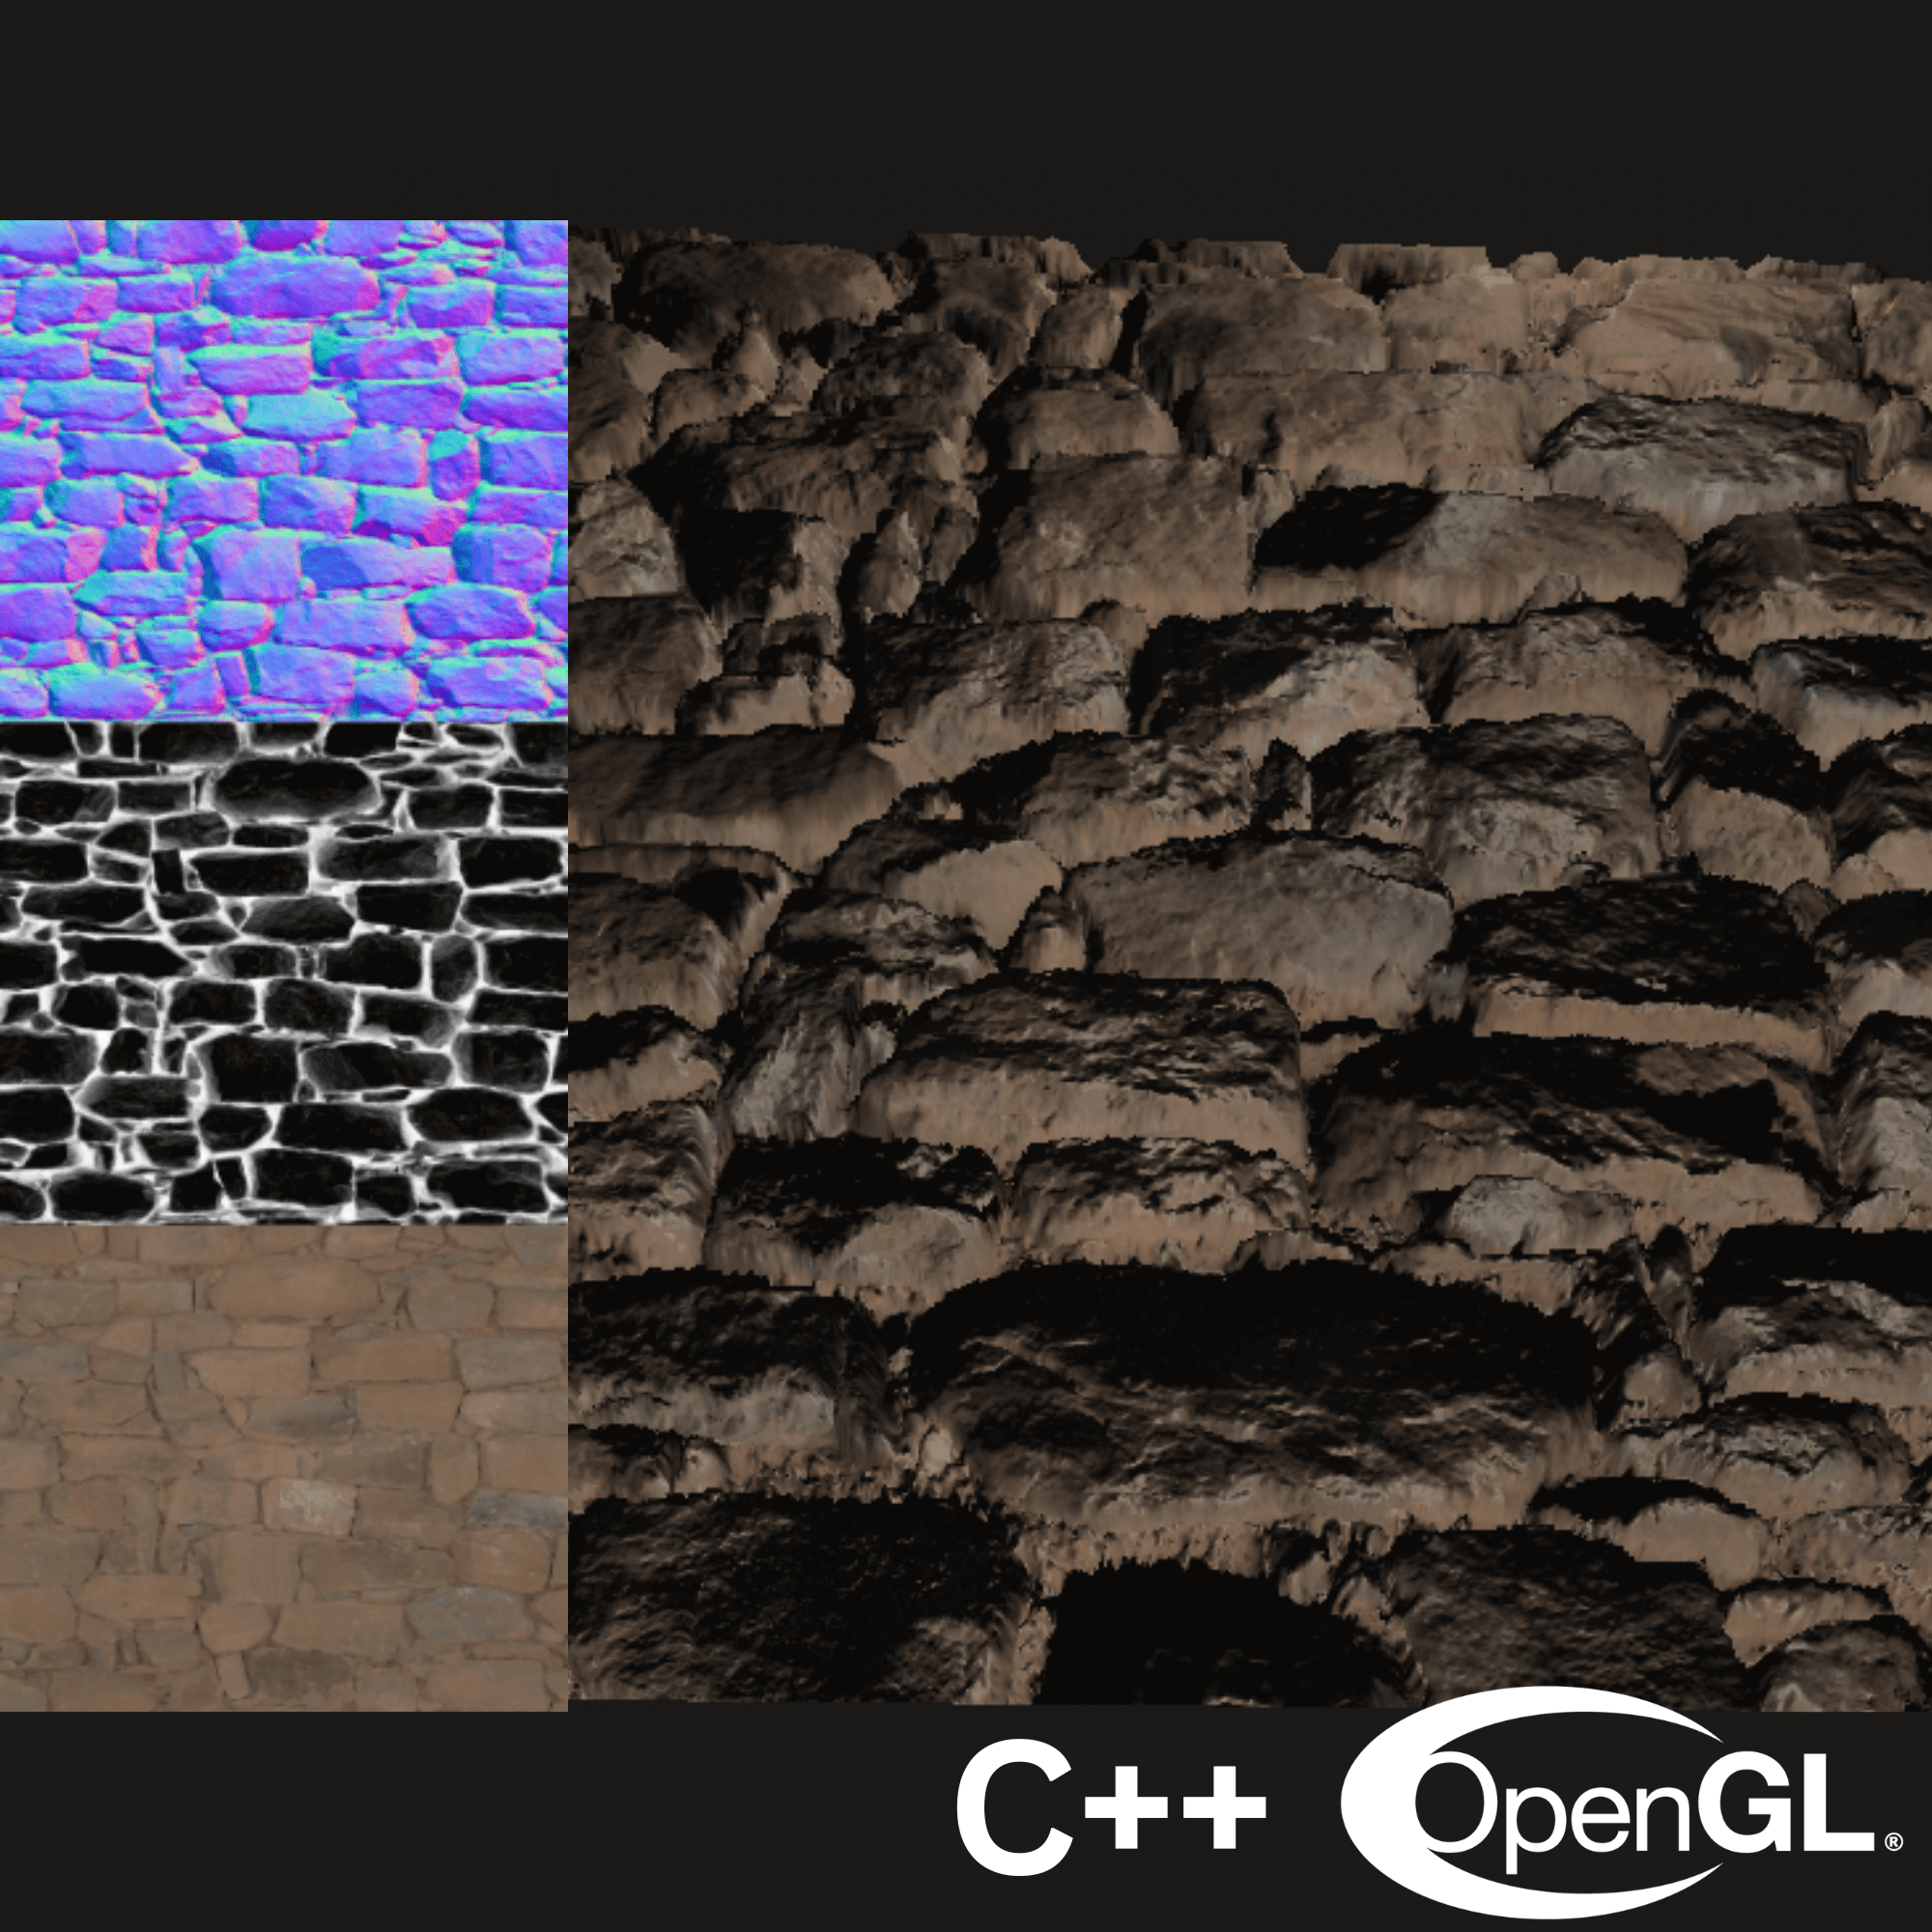 Parallax Mapping